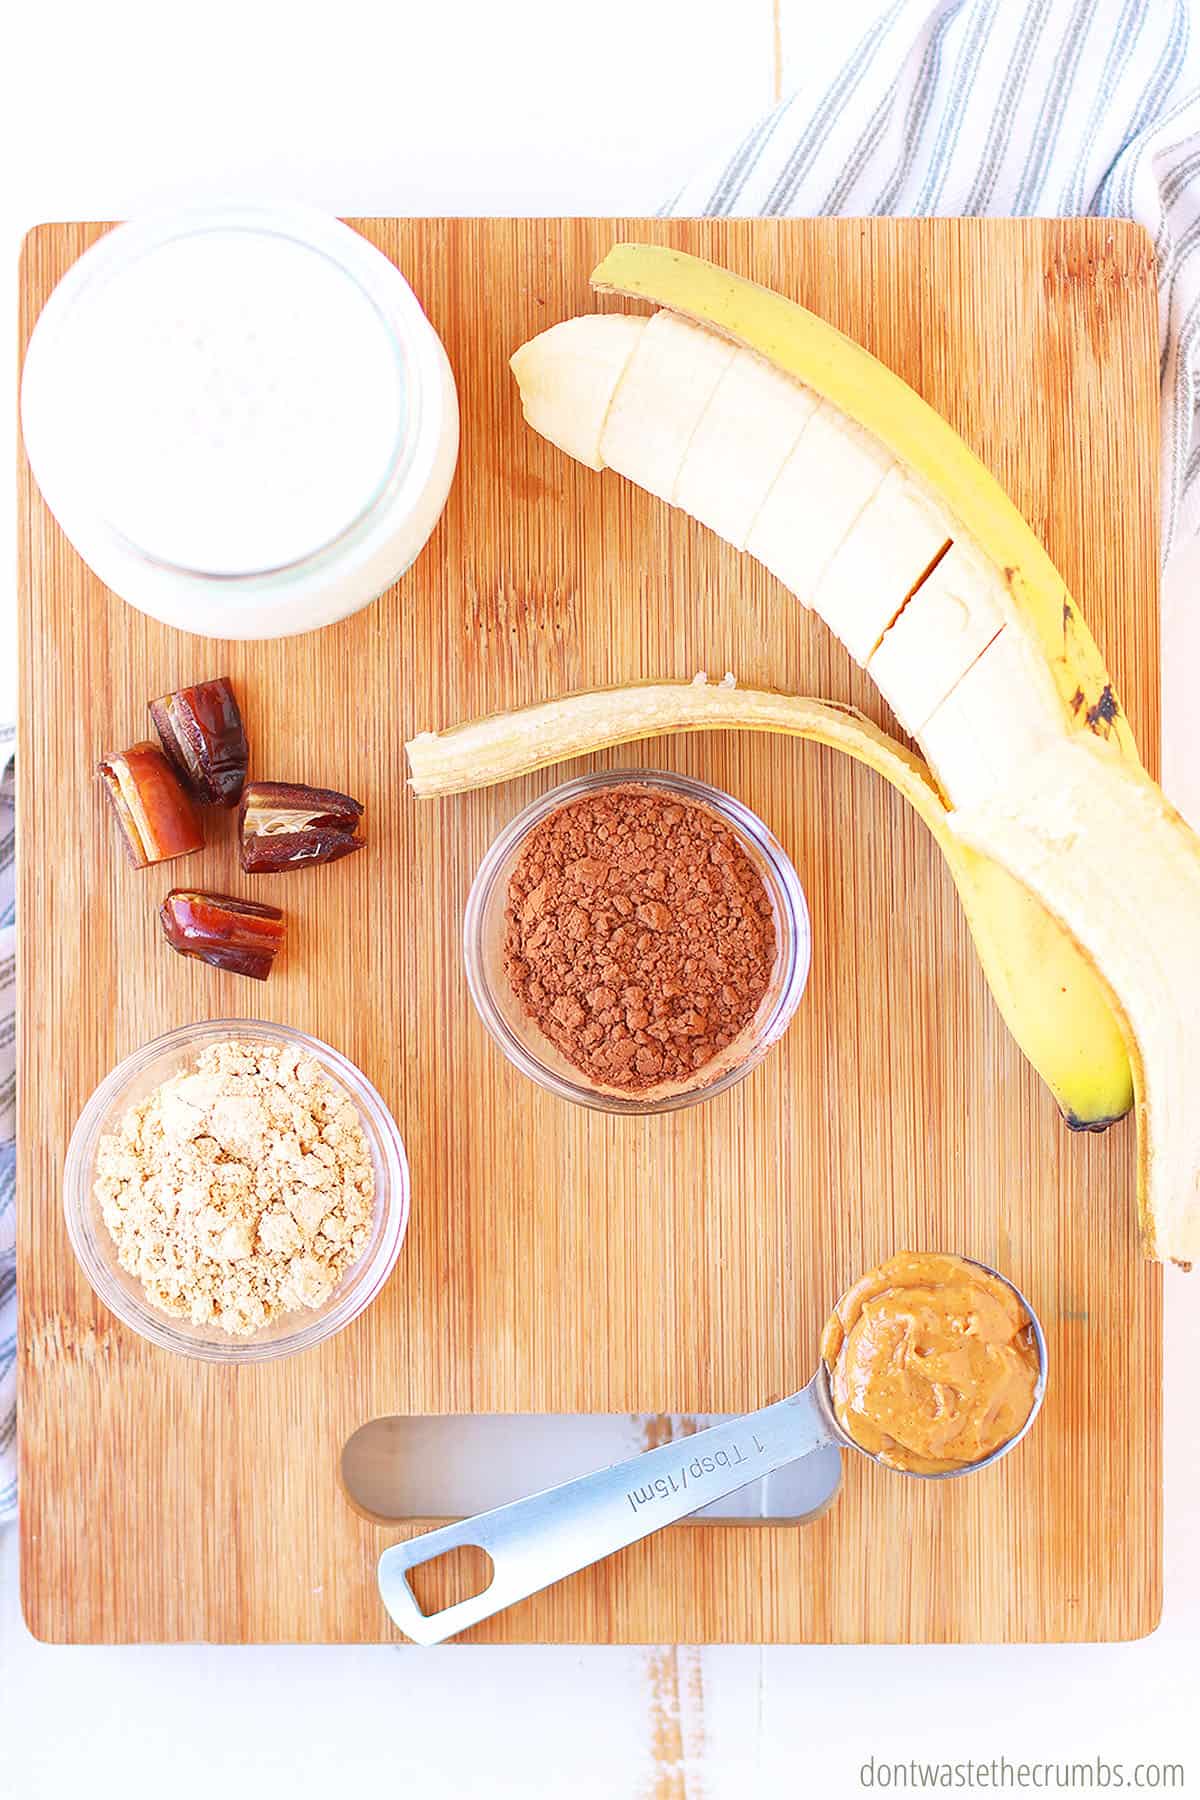 A wooden cutting board with a small cup of milk, sliced banana, sliced dates, peanut butter, cocoa powder, and peanut butter powder.